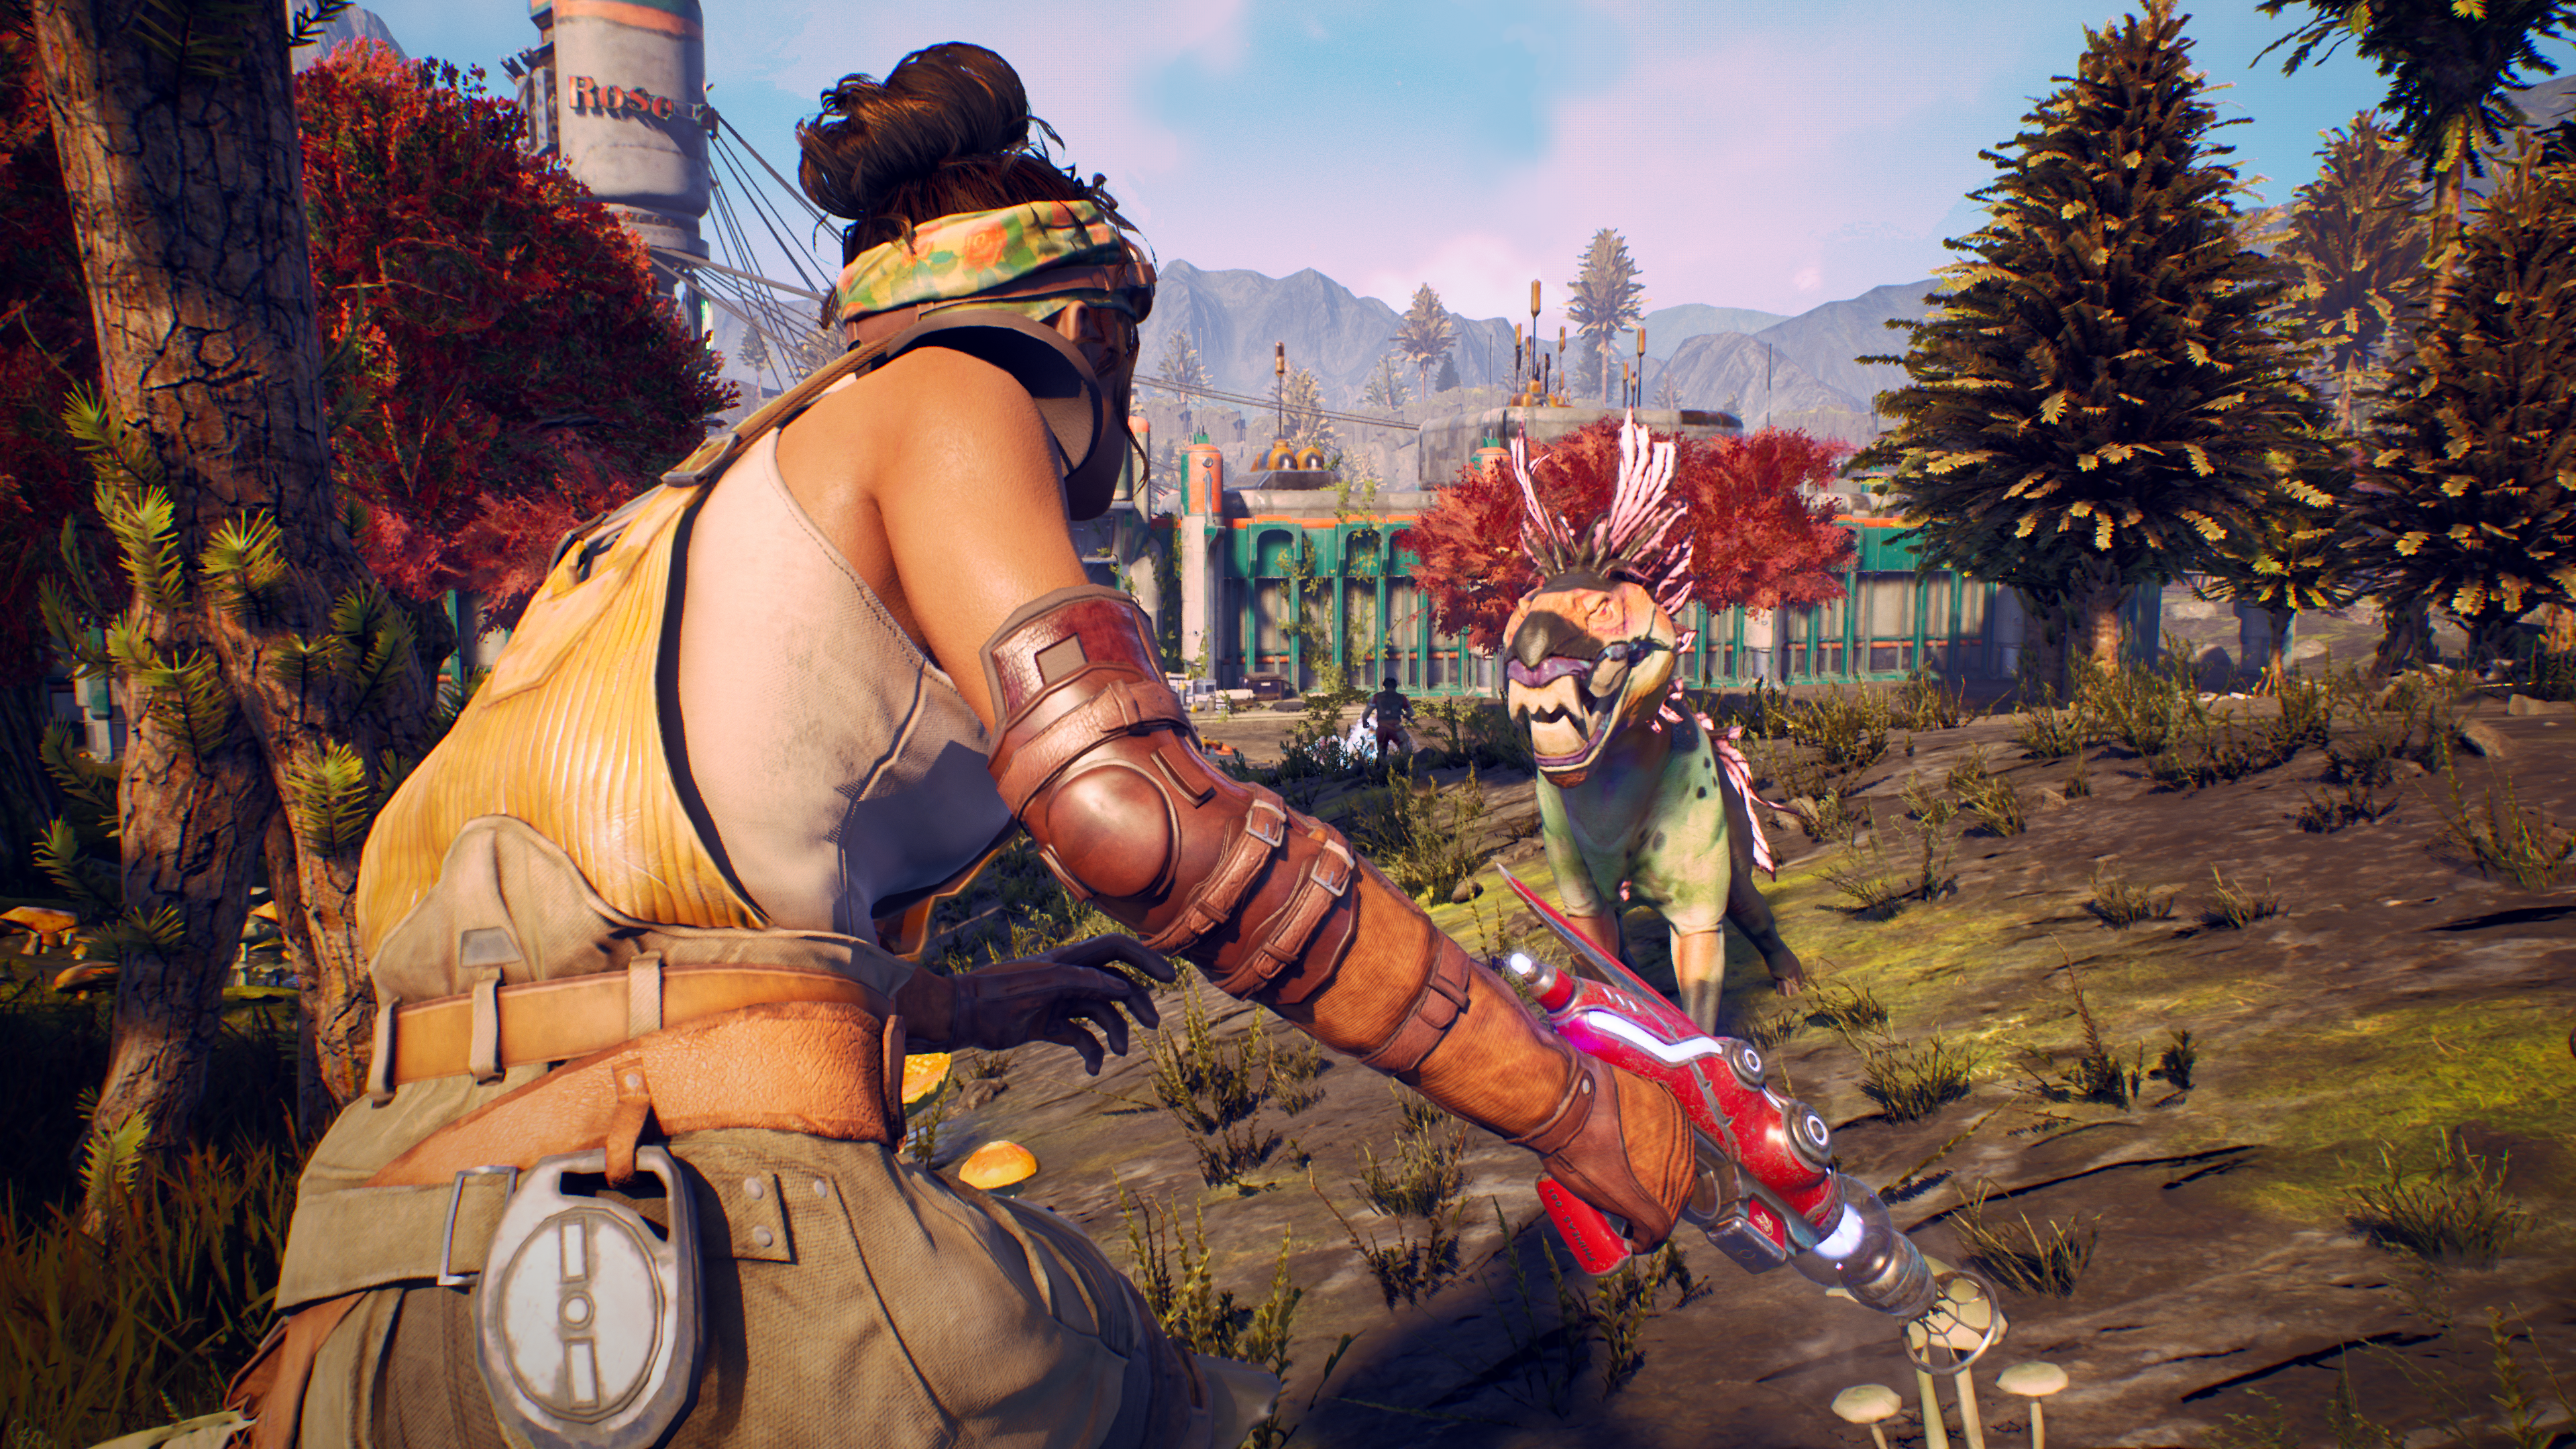 Image for The Outer Worlds has shipped over 2 million units, significantly exceeding company expectations